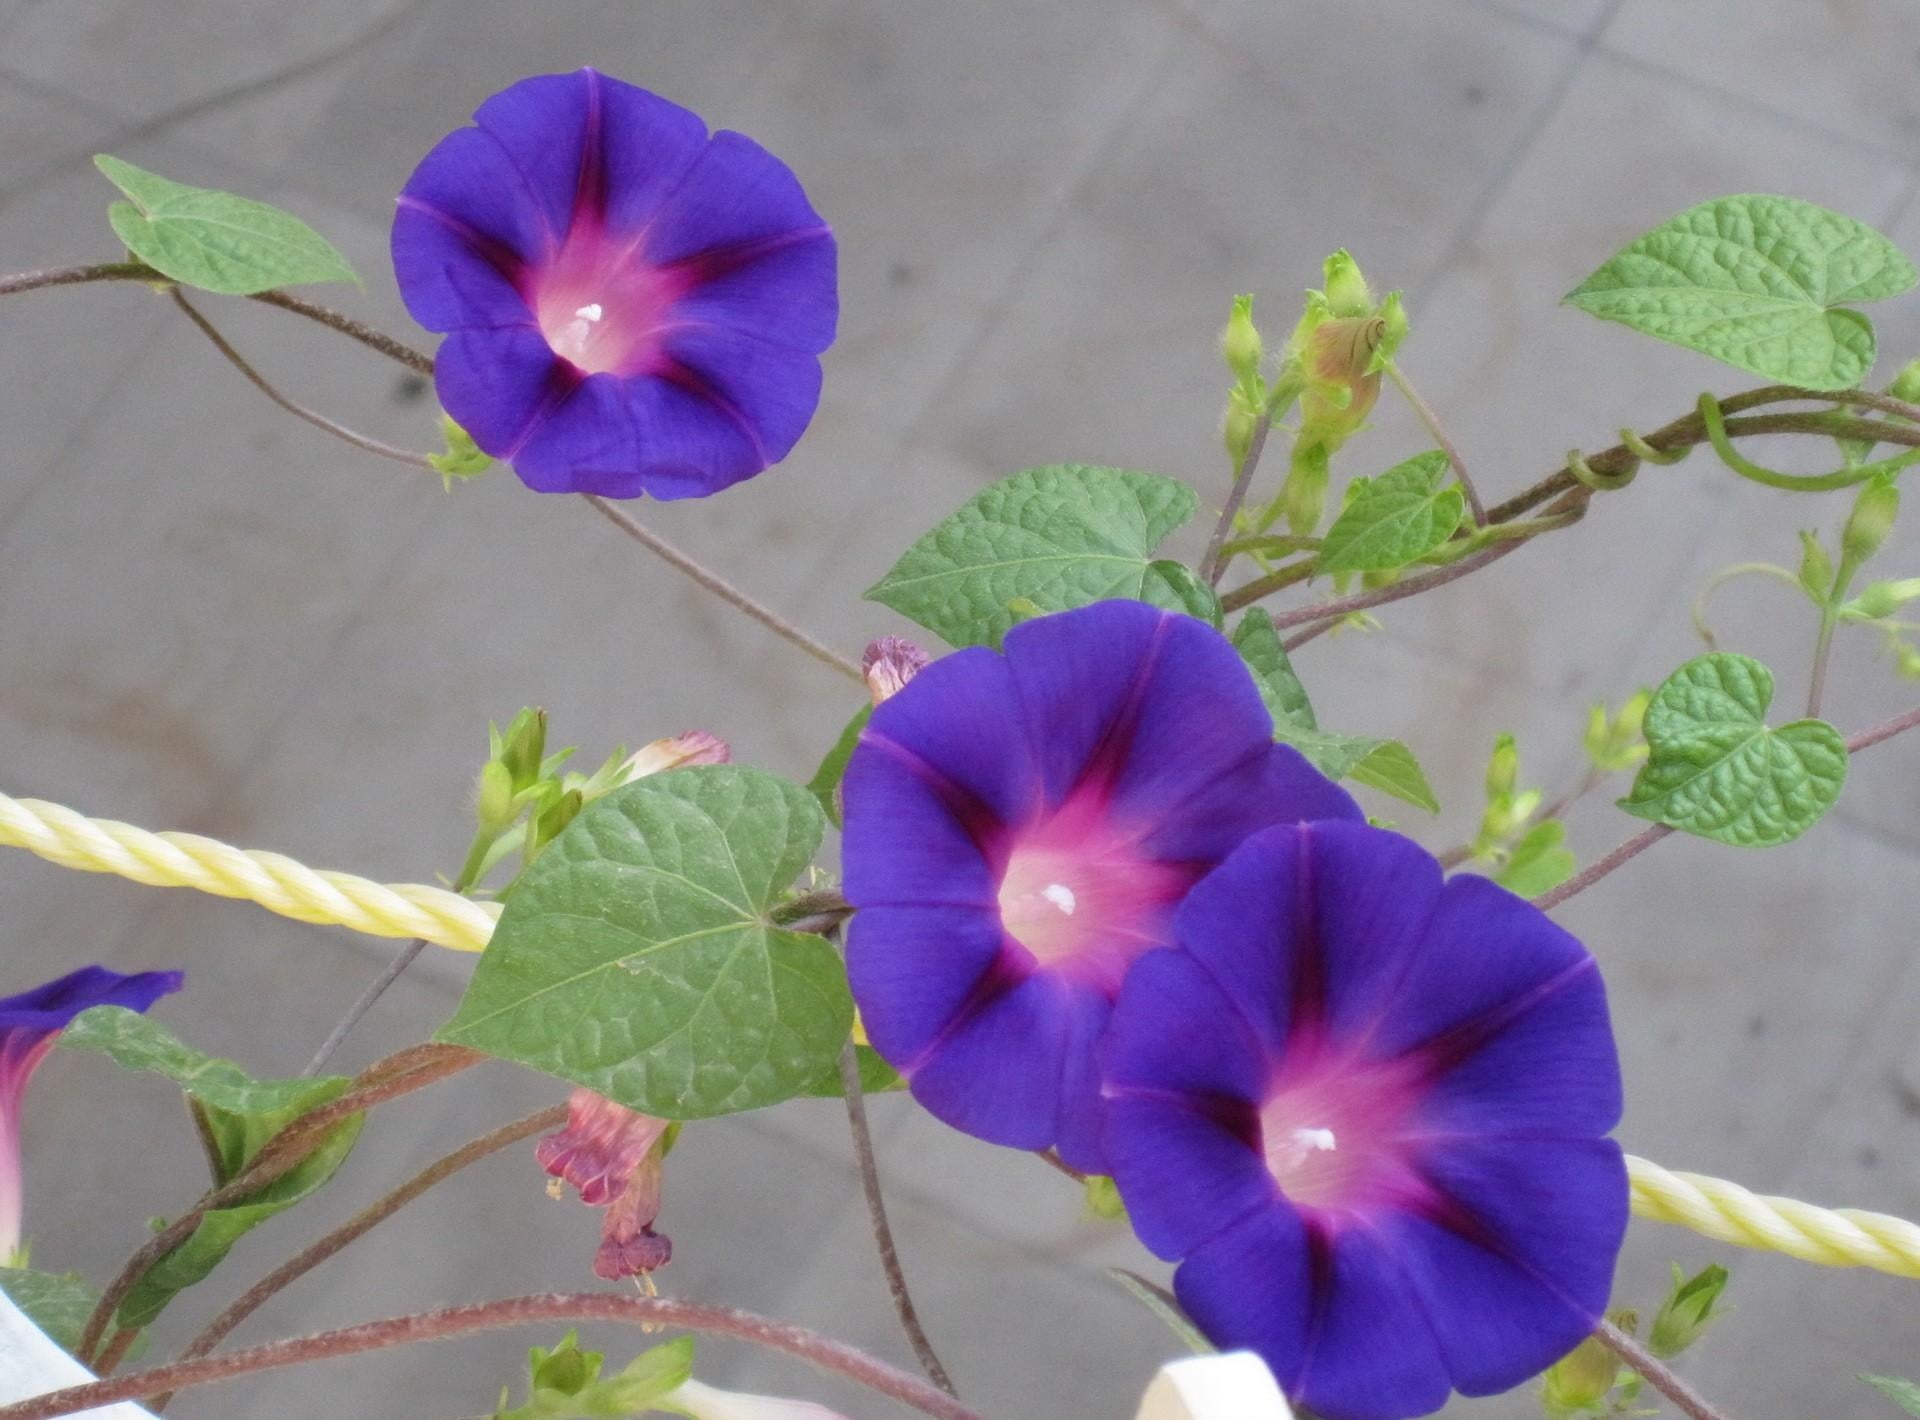 blue-and-pink morning glory flowers, bindweed, bright, green